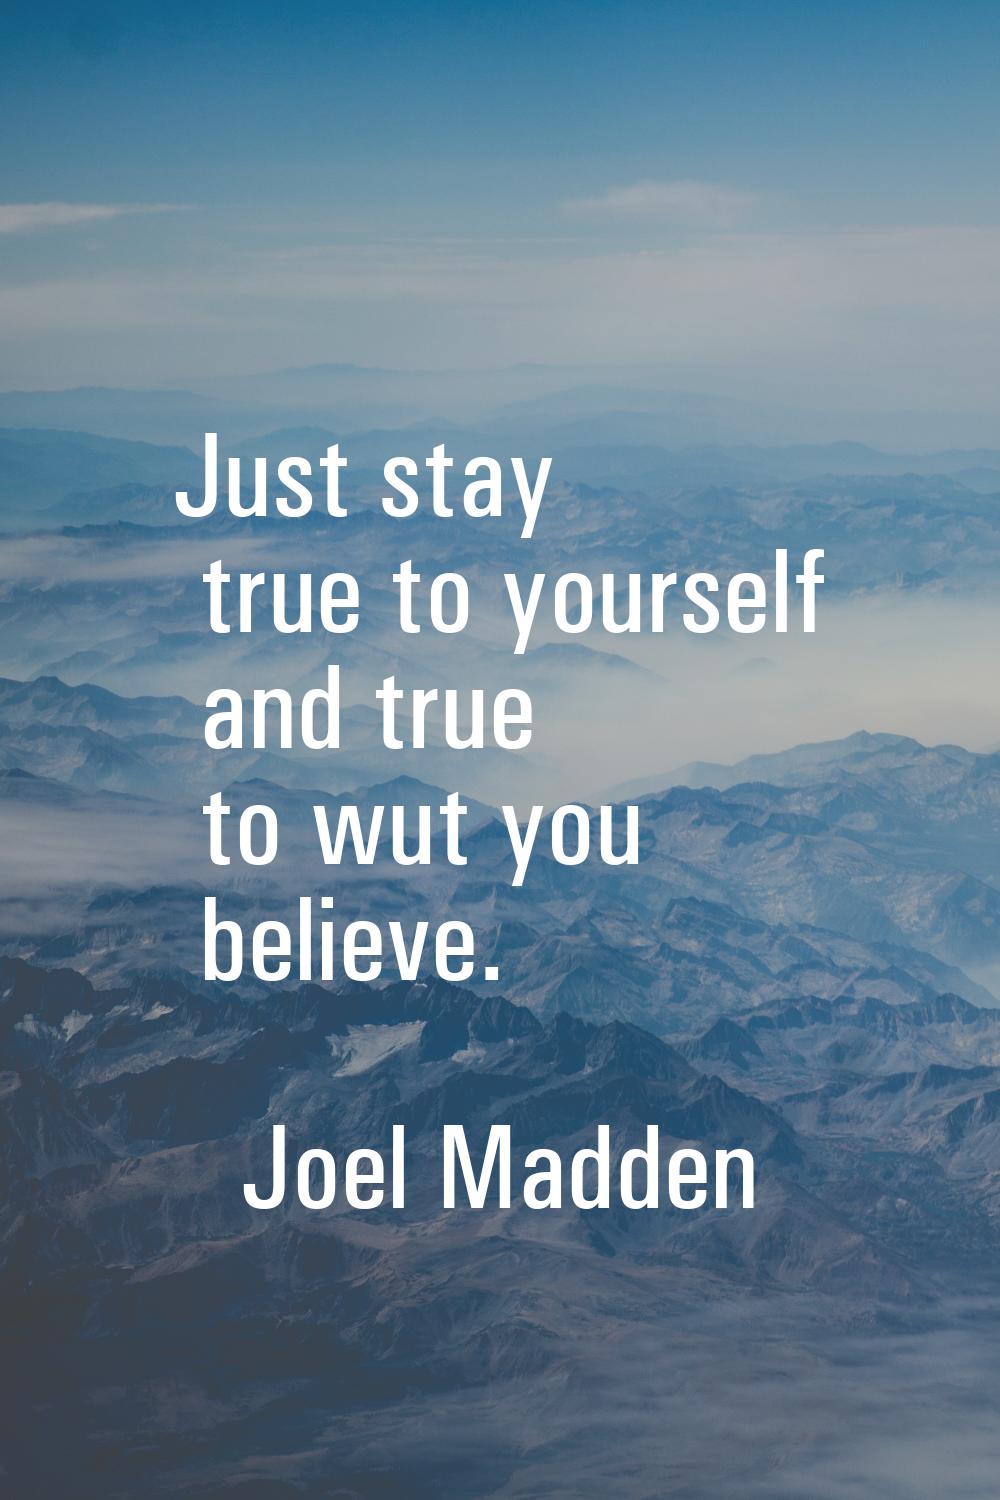 Just stay true to yourself and true to wut you believe.